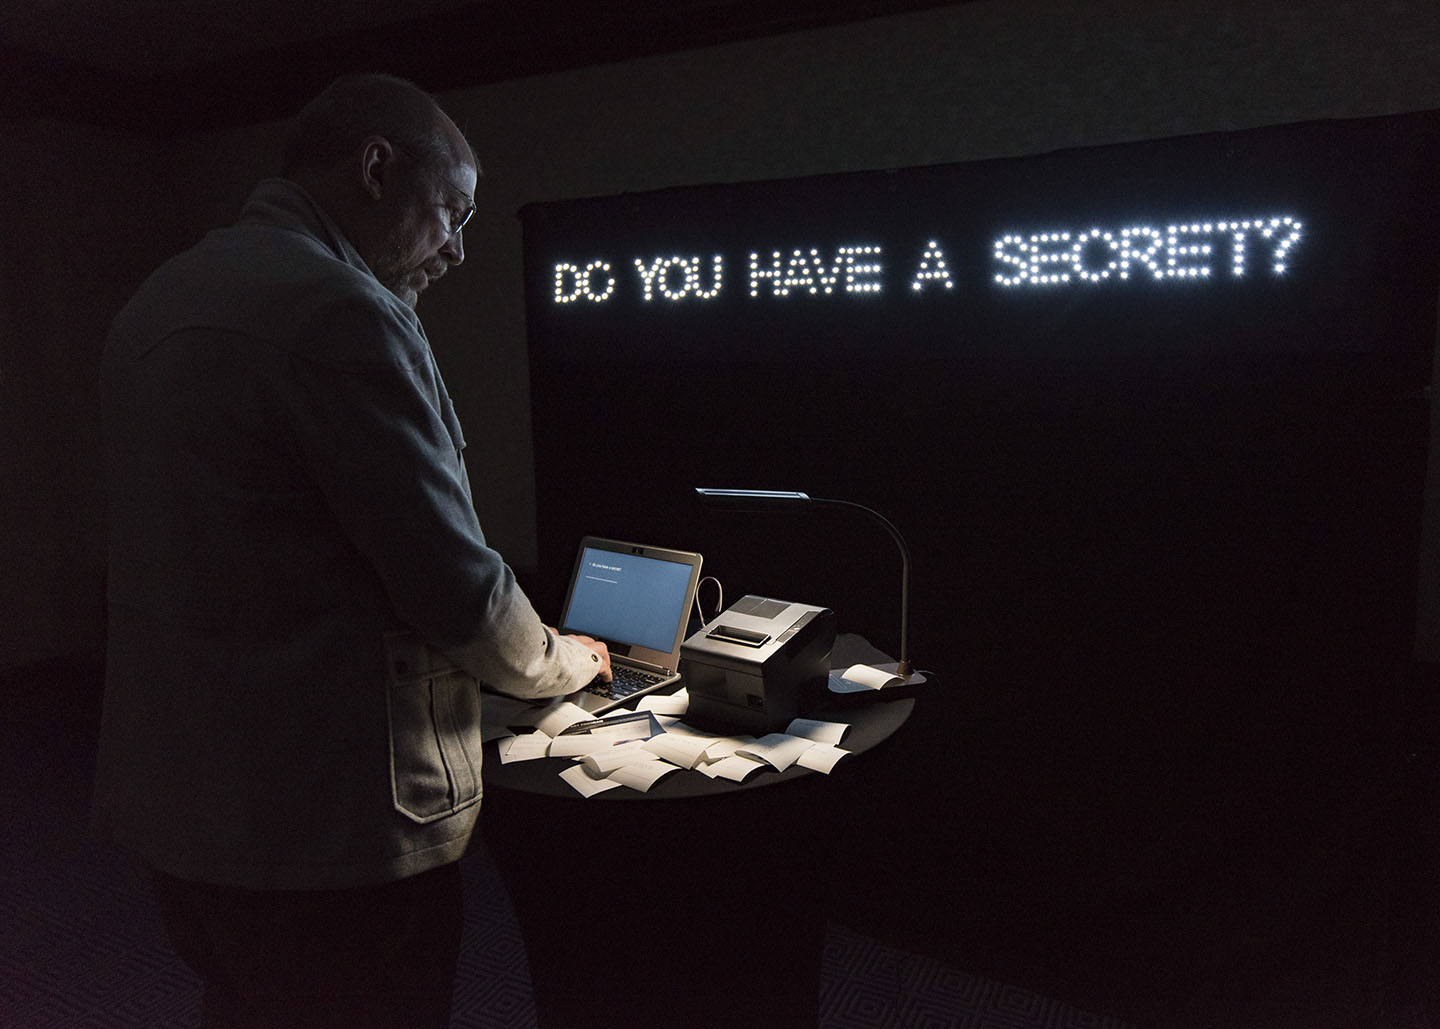 The Future of Secrets by Sarah Newman, Jessica Yurkofsky, and Rachel Kalmar is part of the 2018 SXSW Art Program. Find the schedule and learn about other installations